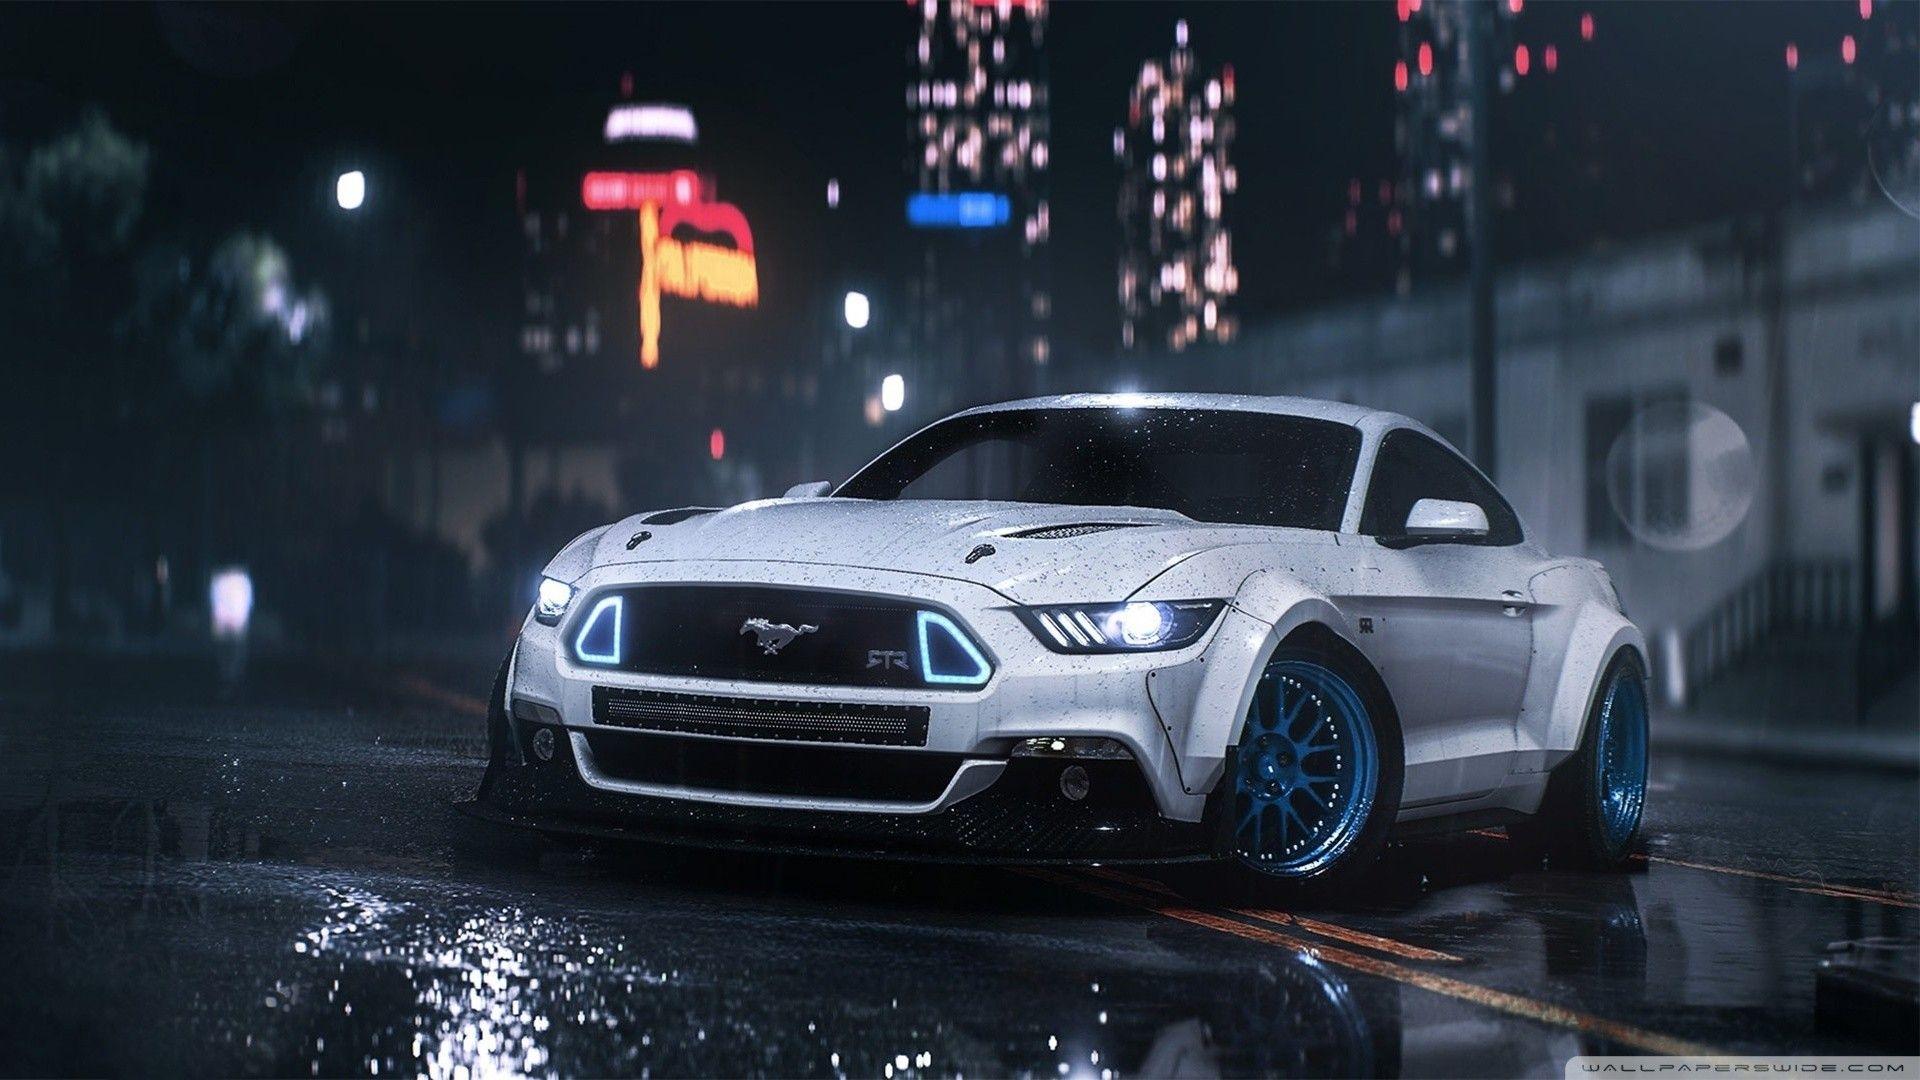 44+ Ford Mustang Wallpaper Hd 1366 768 For Pc full HD